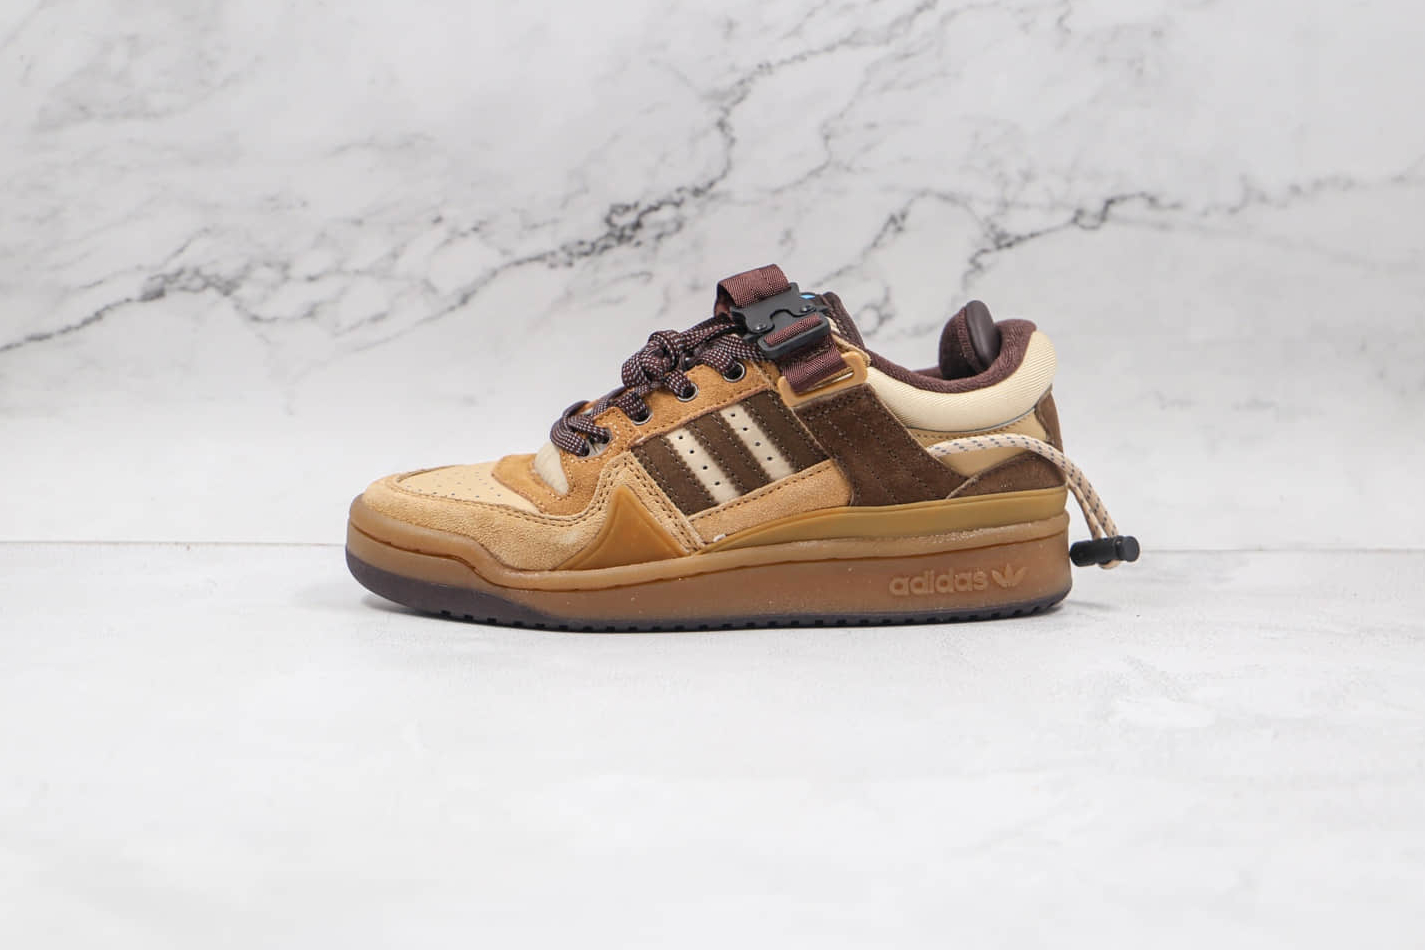 Adidas Bad Bunny x Forum Buckle Low 'The First Cafe' GW0264 - Limited Edition Collab Sneakers